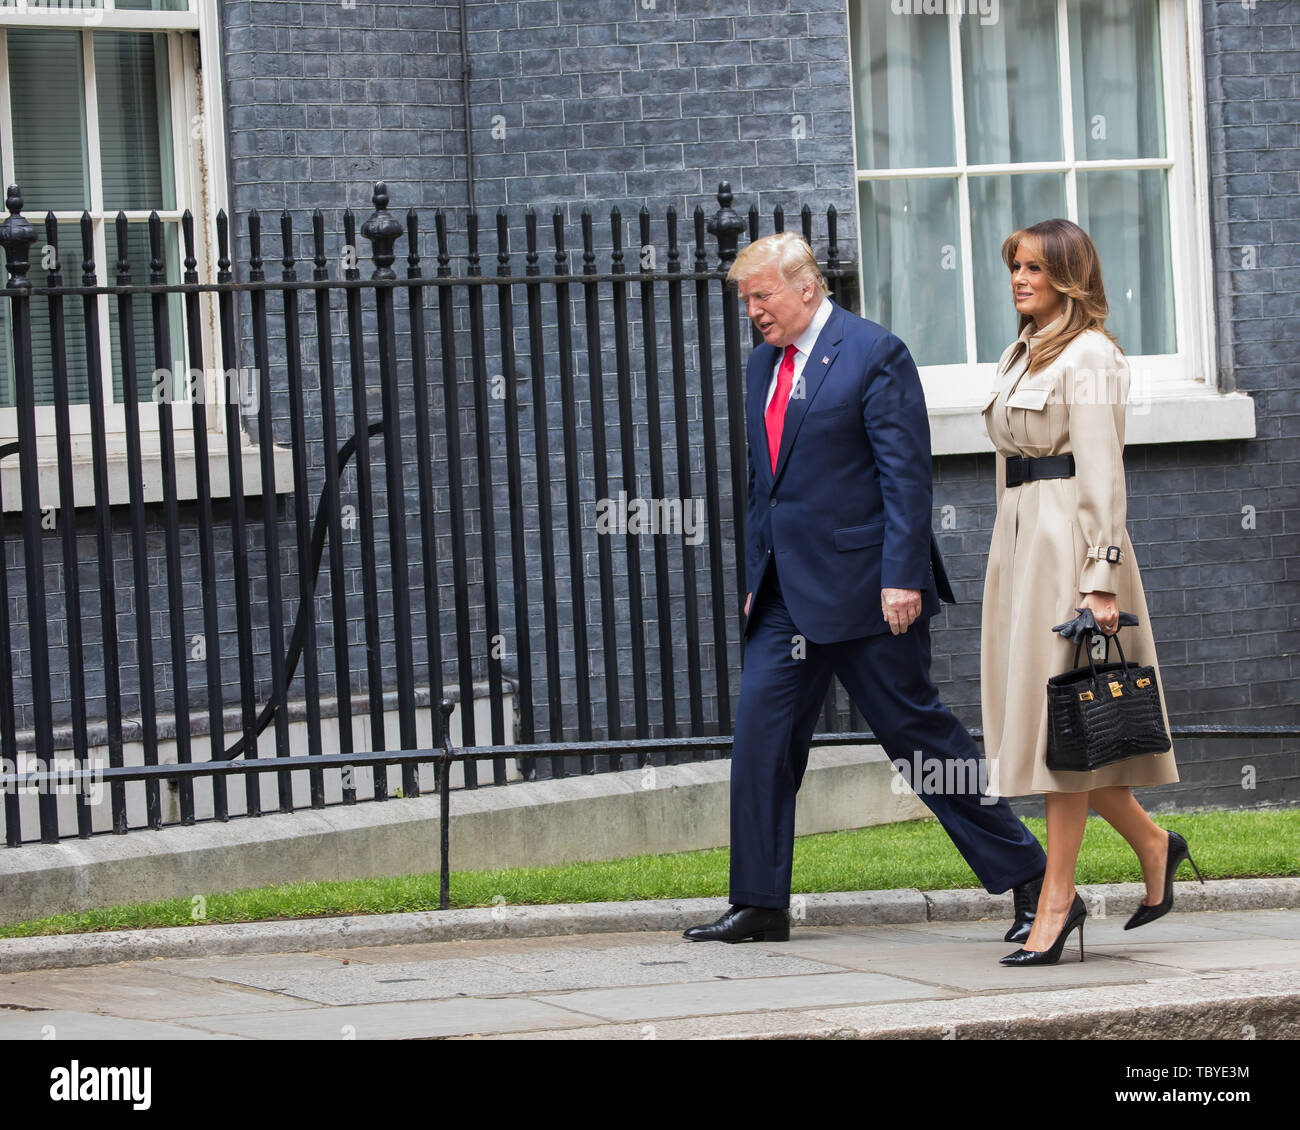 London, UK. 4th June, 2019. President Trump and his wife Melania arrive to meet Theresa May in Downing Street for a lunchtime meeting. Credit: Keith Larby/Alamy Live News Stock Photo